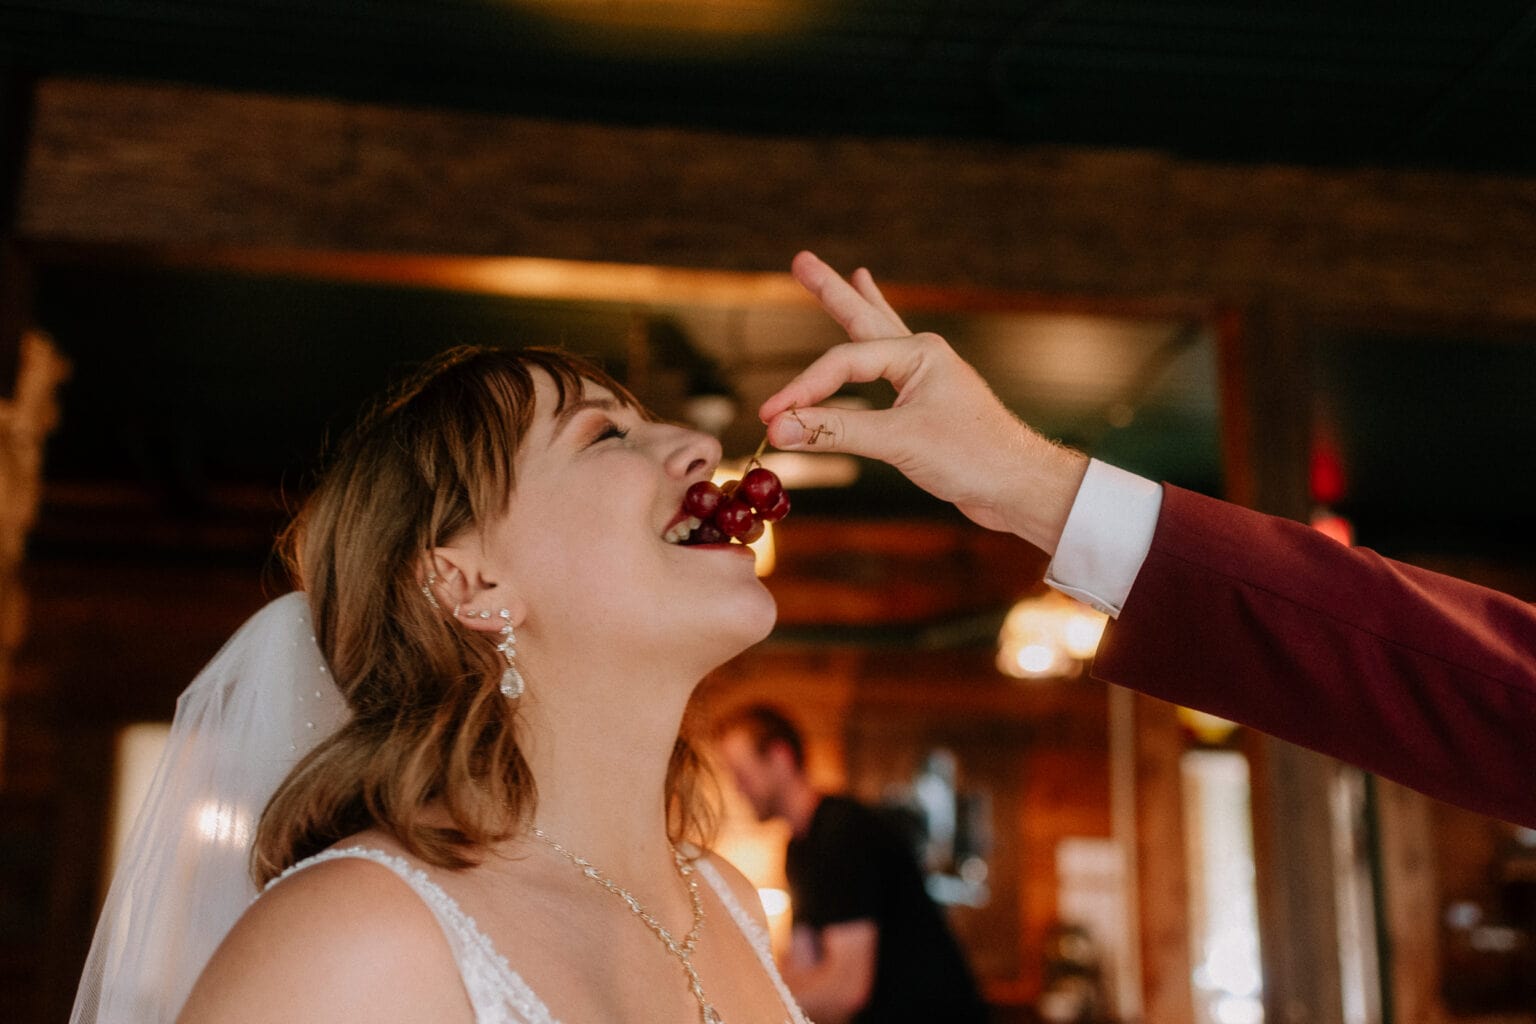 Bride getting fed grapes by groom as Toronto wedding photographer captures this fleeting moment.